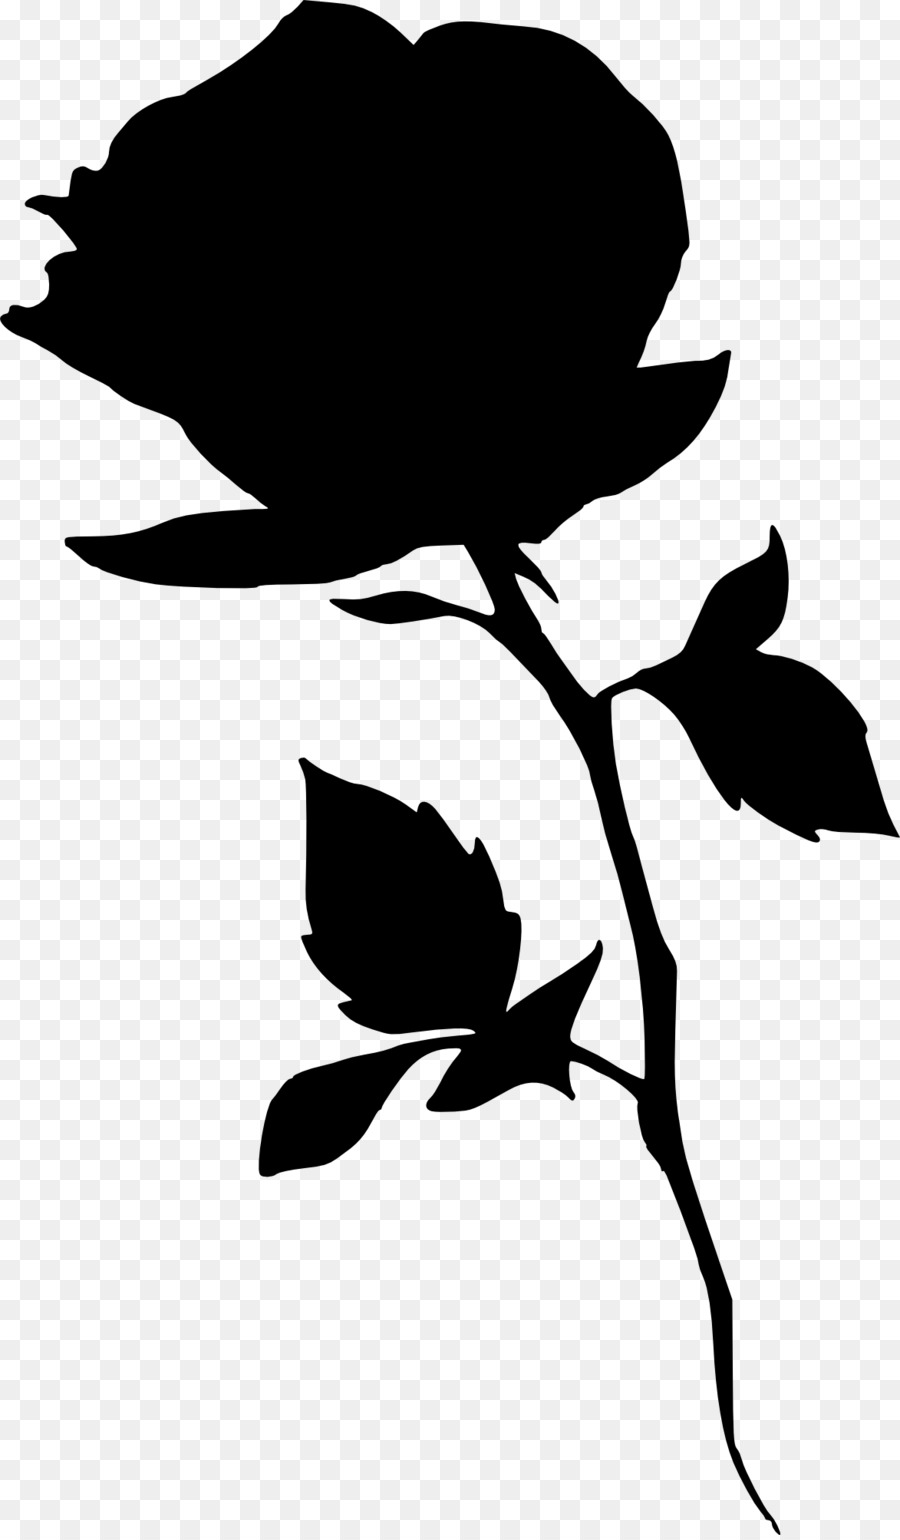 Silhouette Clip art - rose outline png download - 1173*2000 - Free Transparent Silhouette png Download.